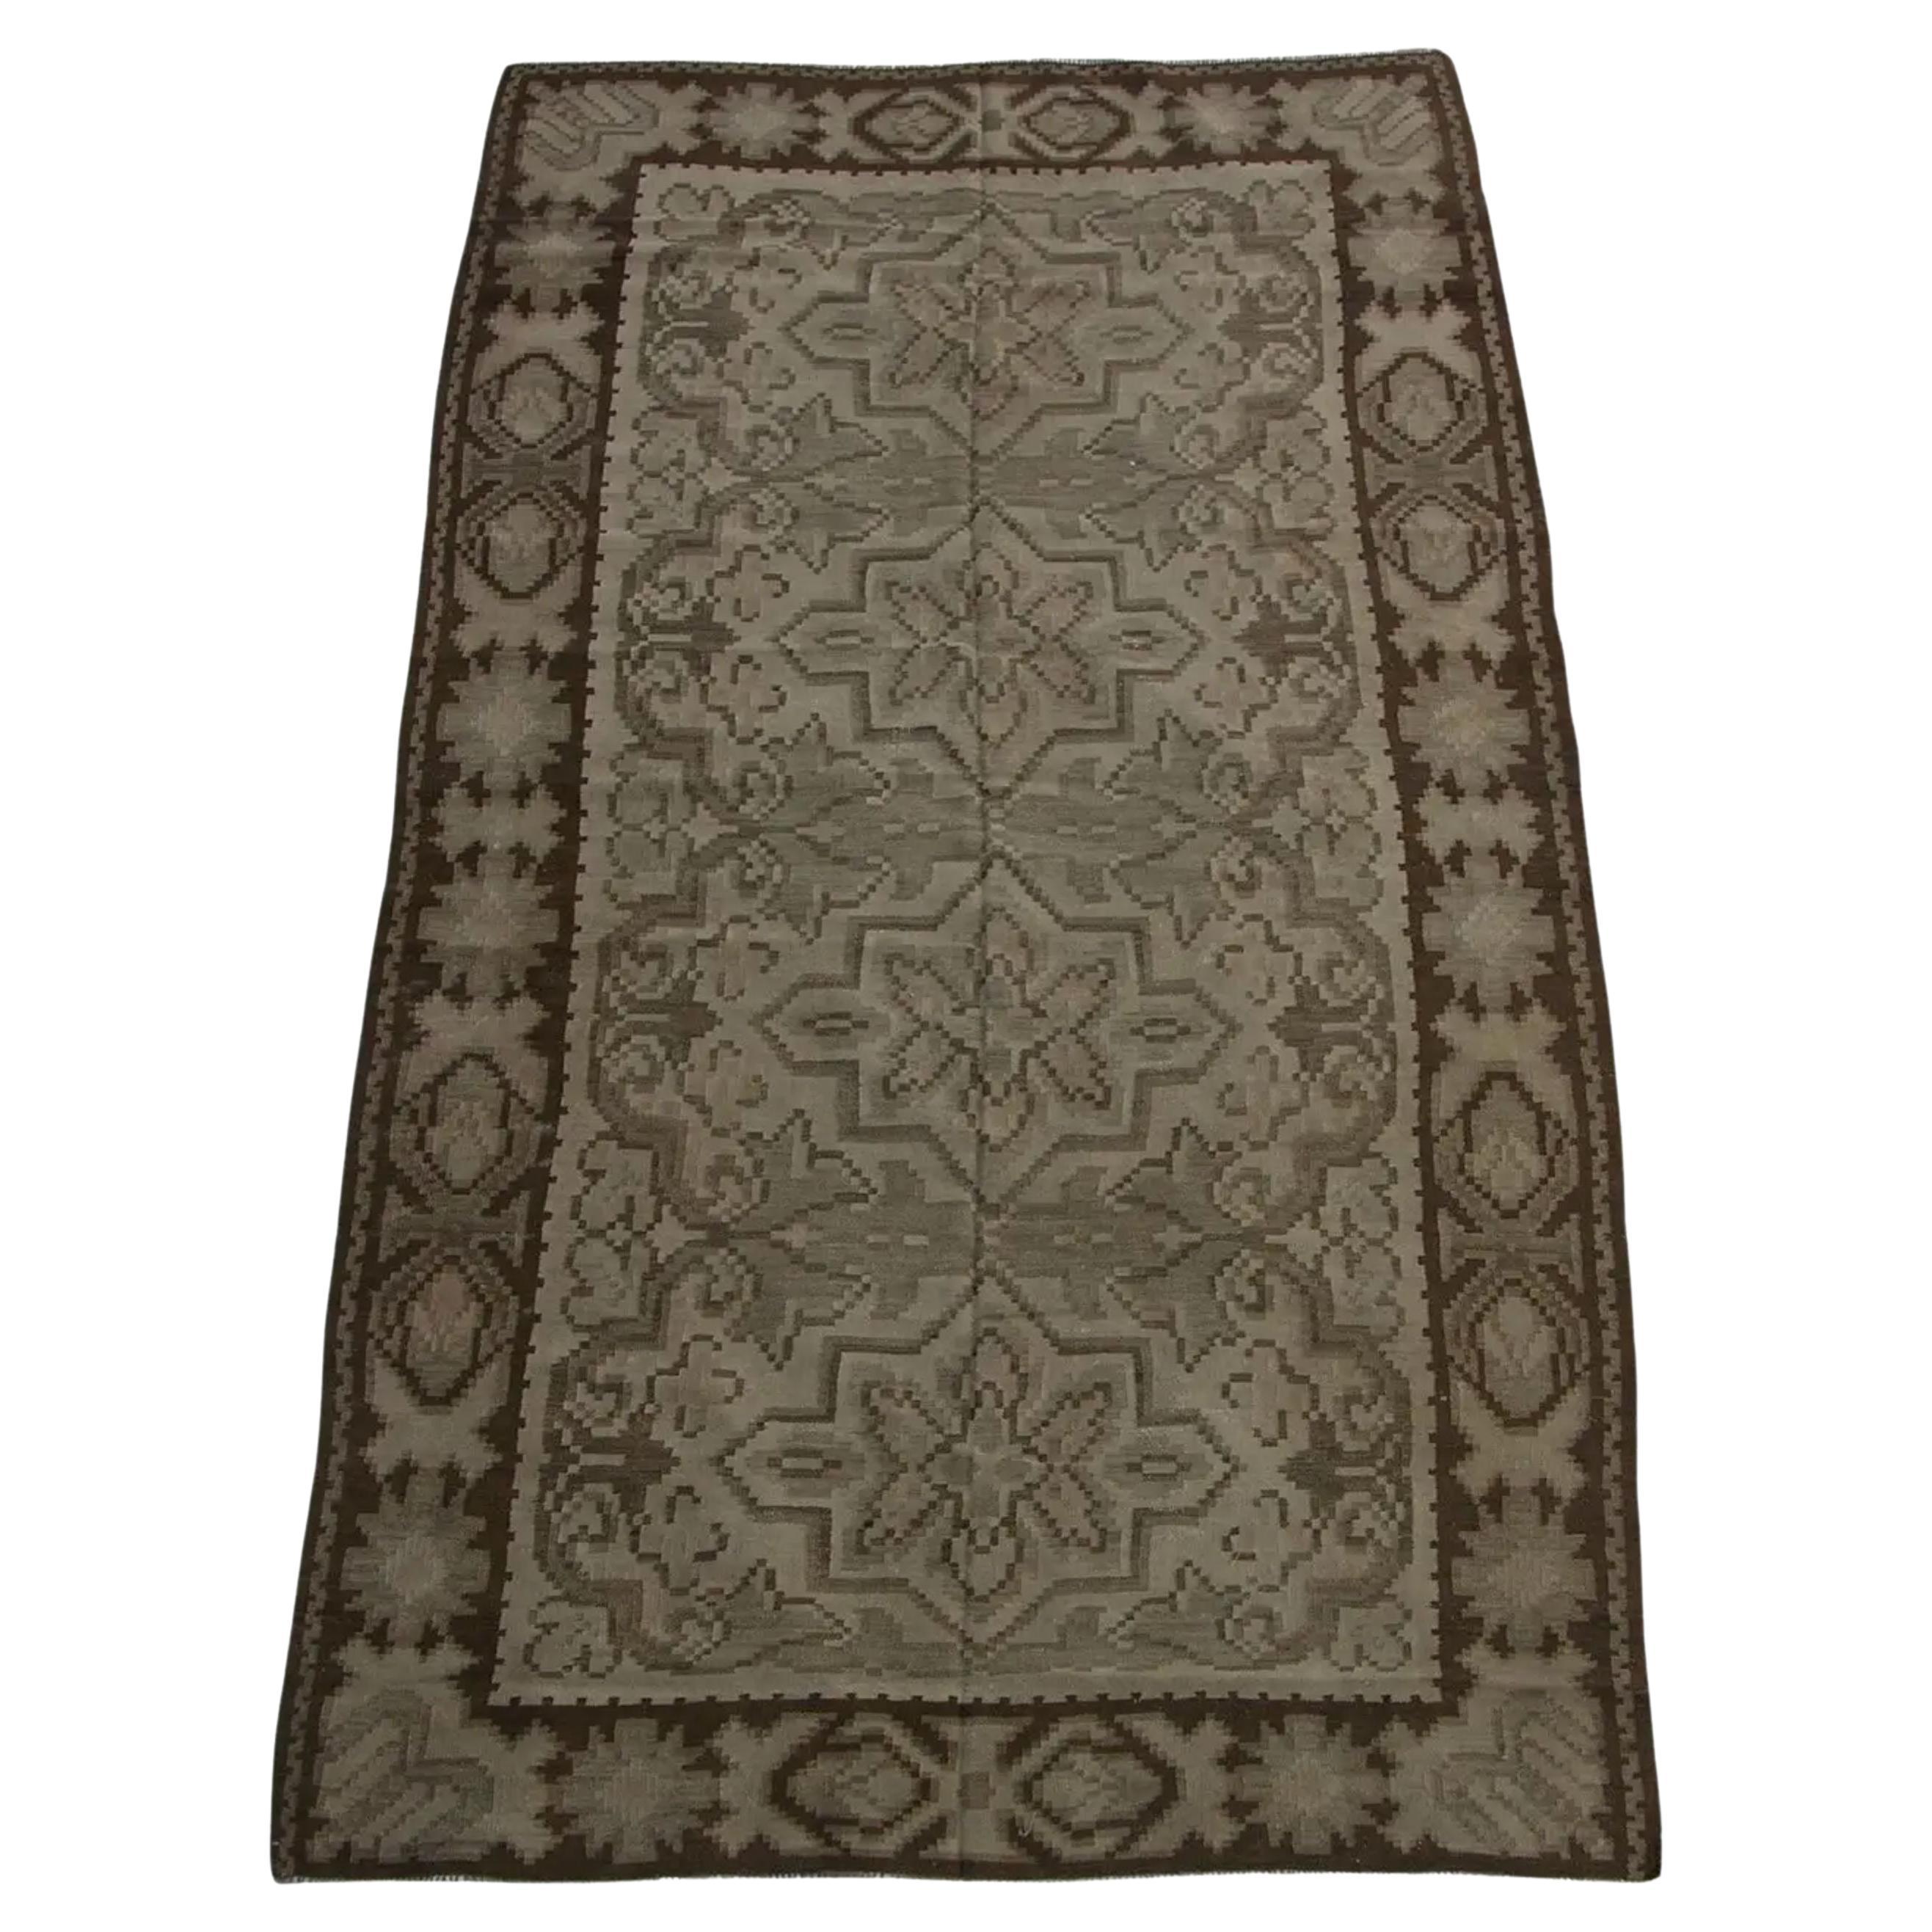 1920 Antique Muted Style Flat Weave Kilim